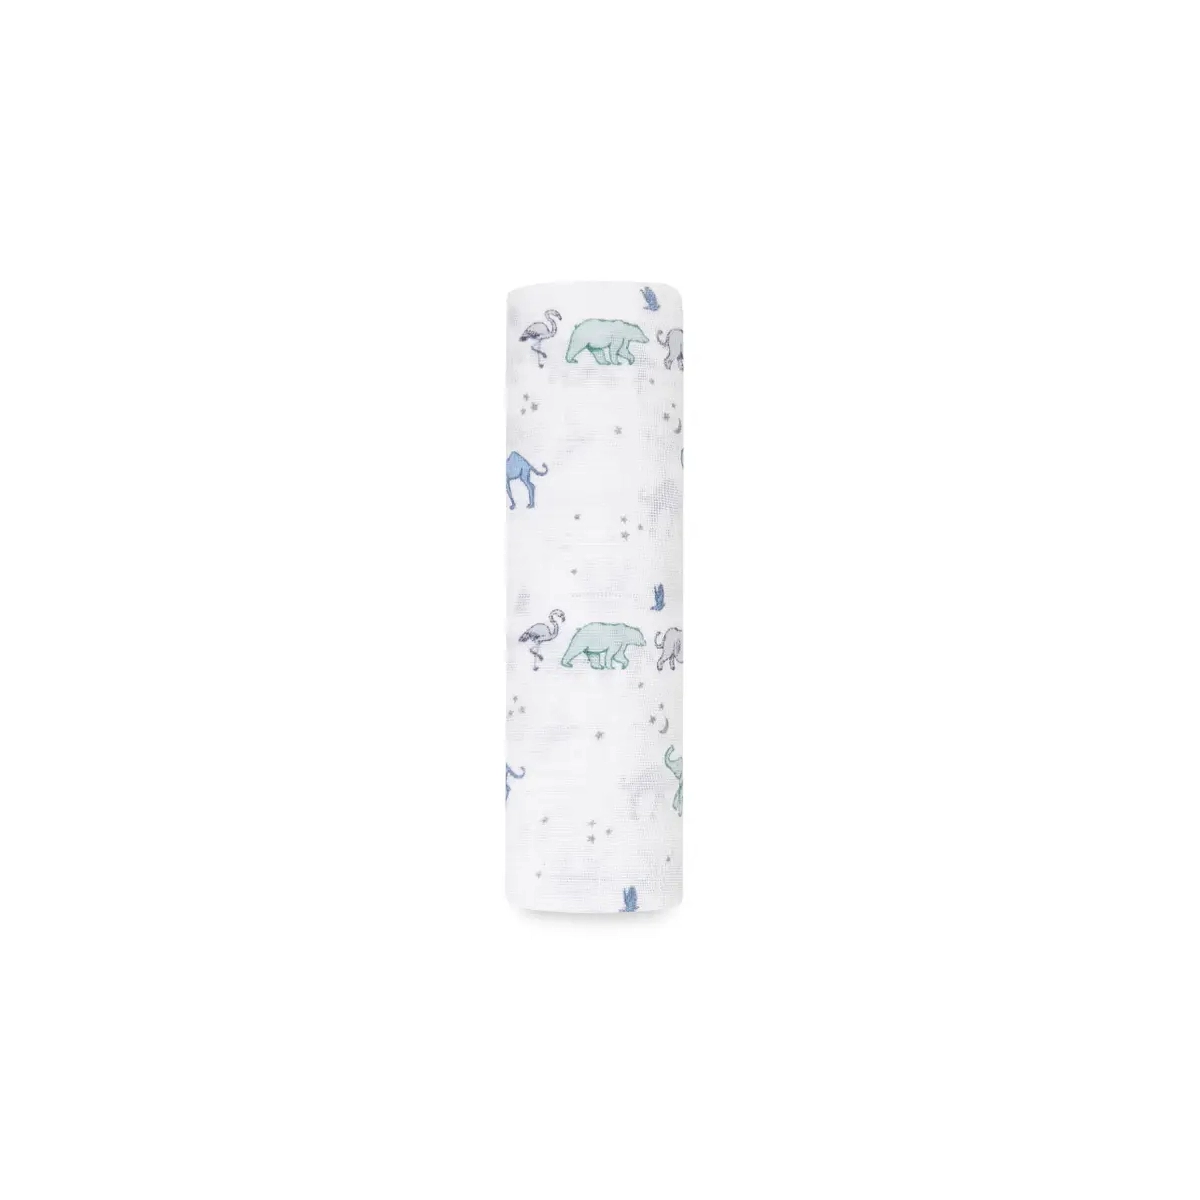 Aden + Anais Large Swaddle Cotton Muslin